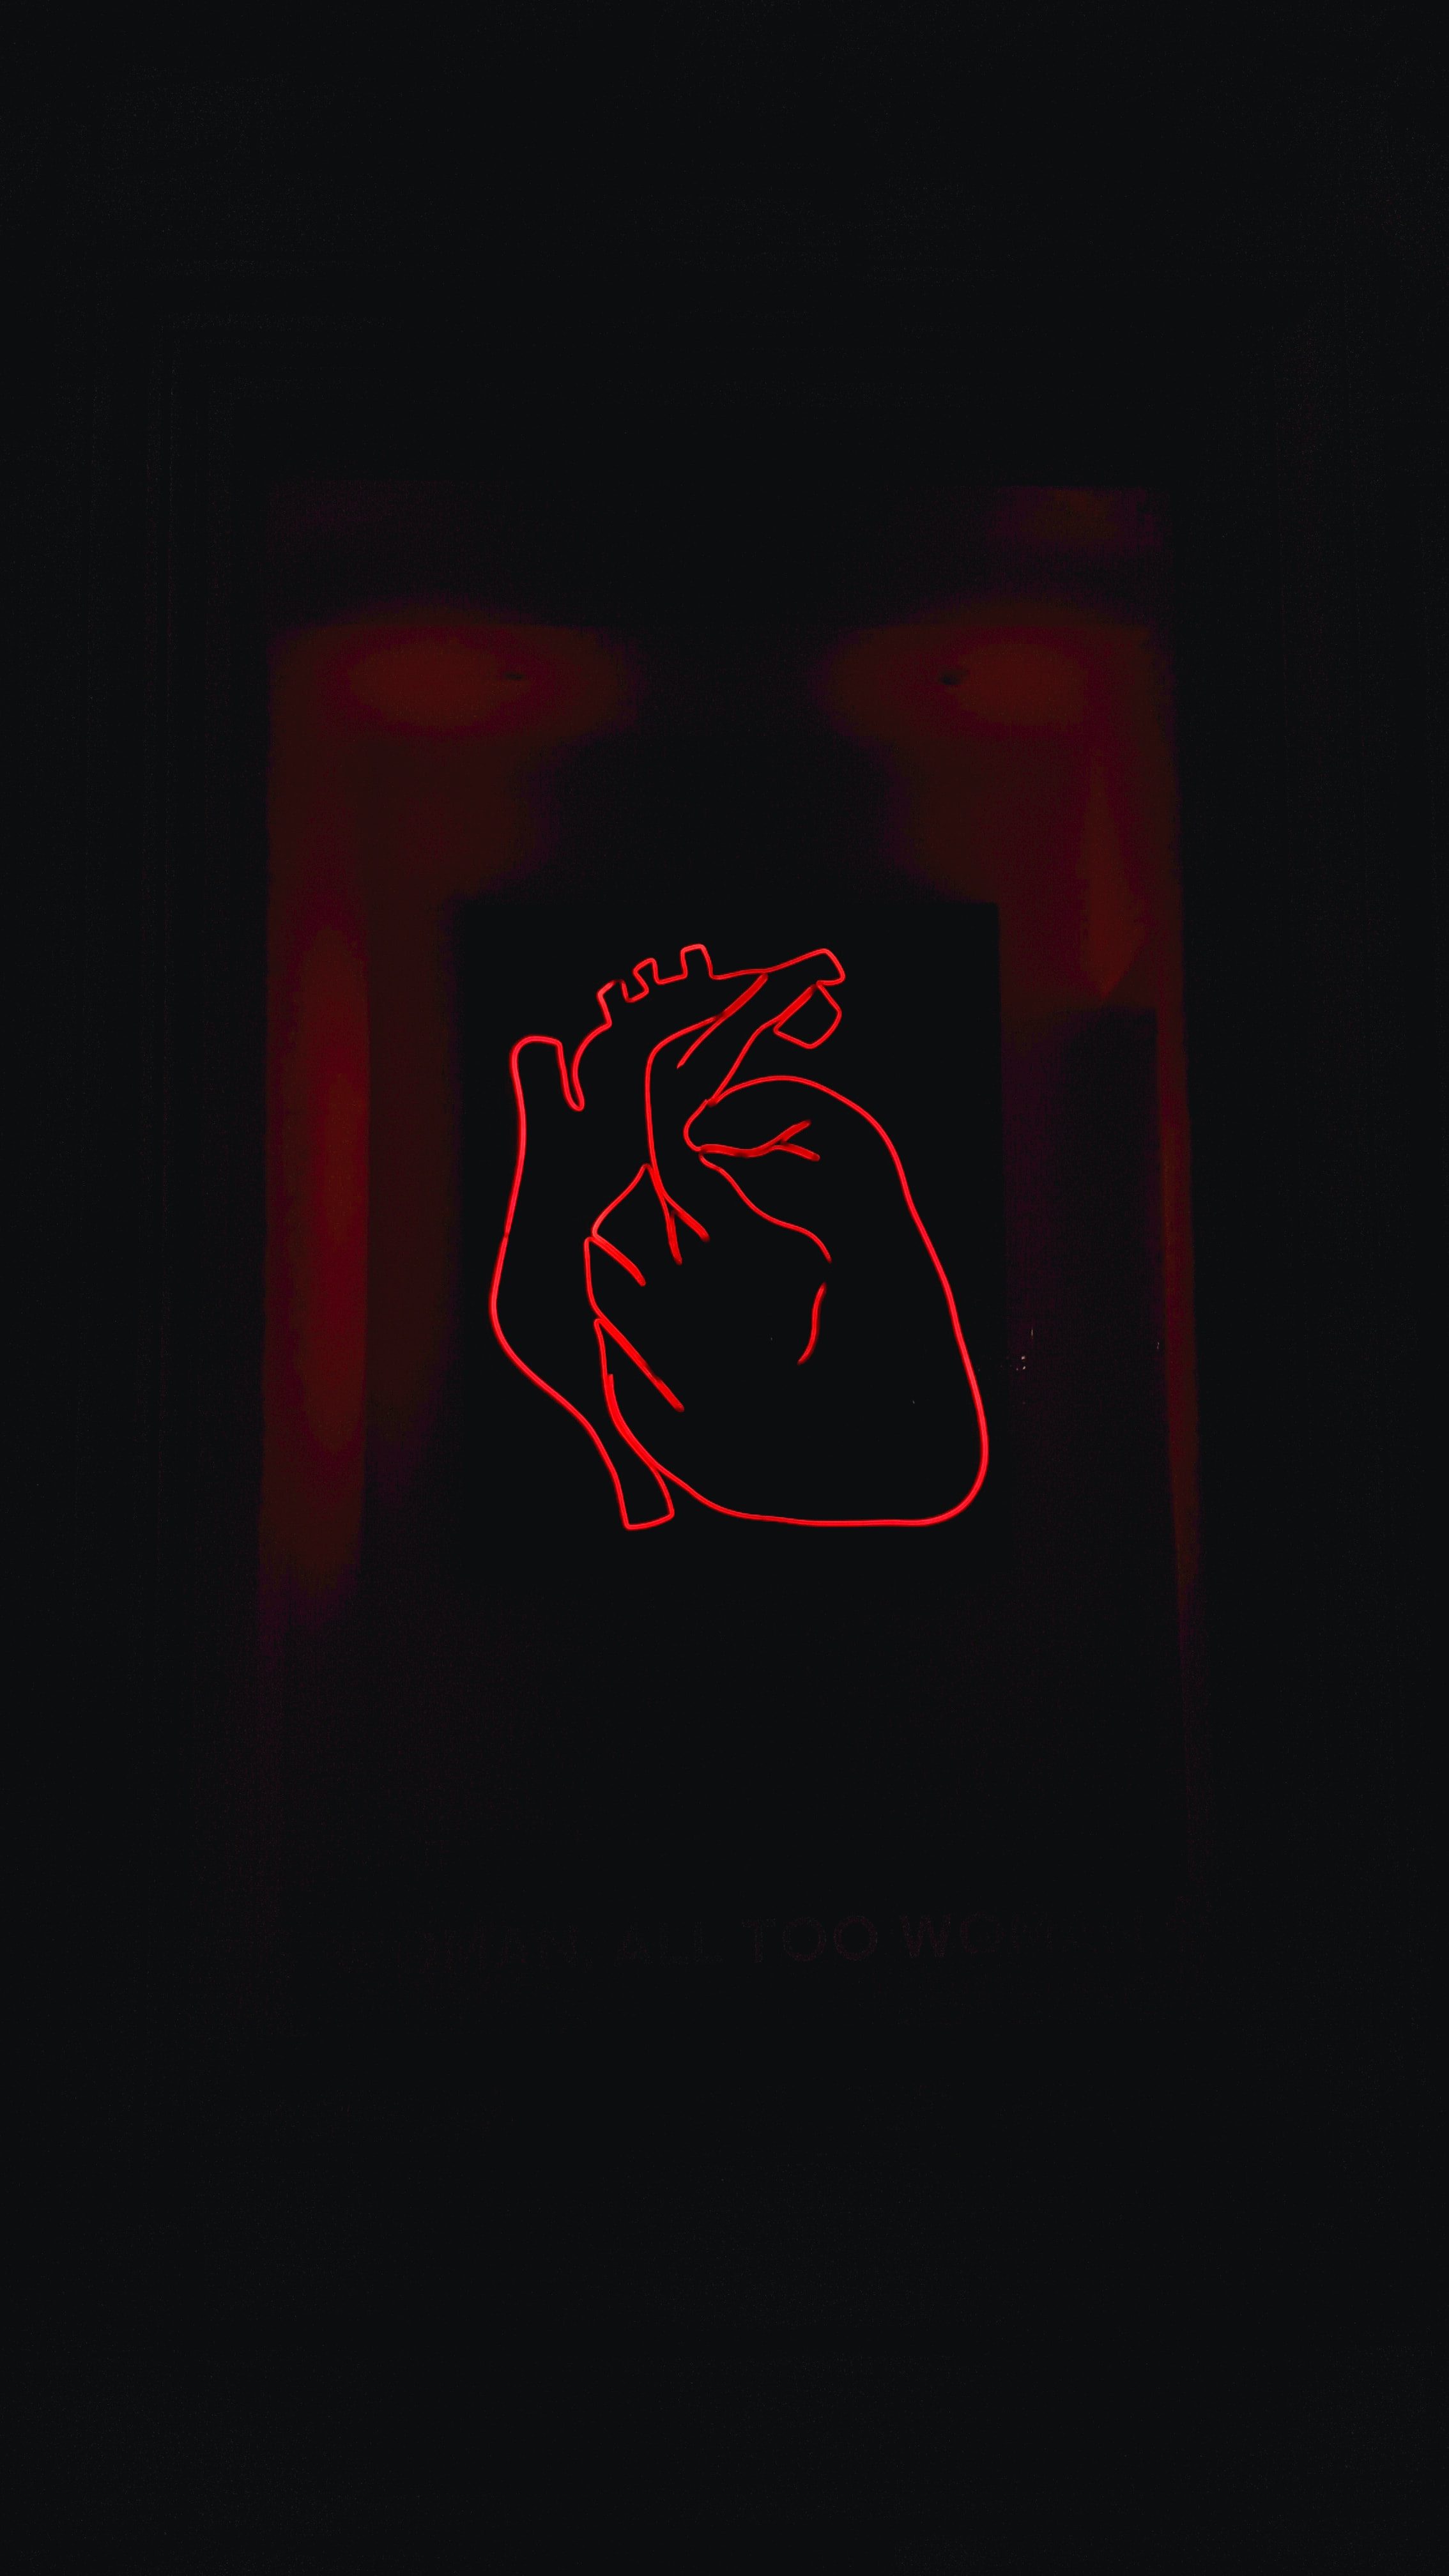 An image of a heart.┃Source: Unsplash